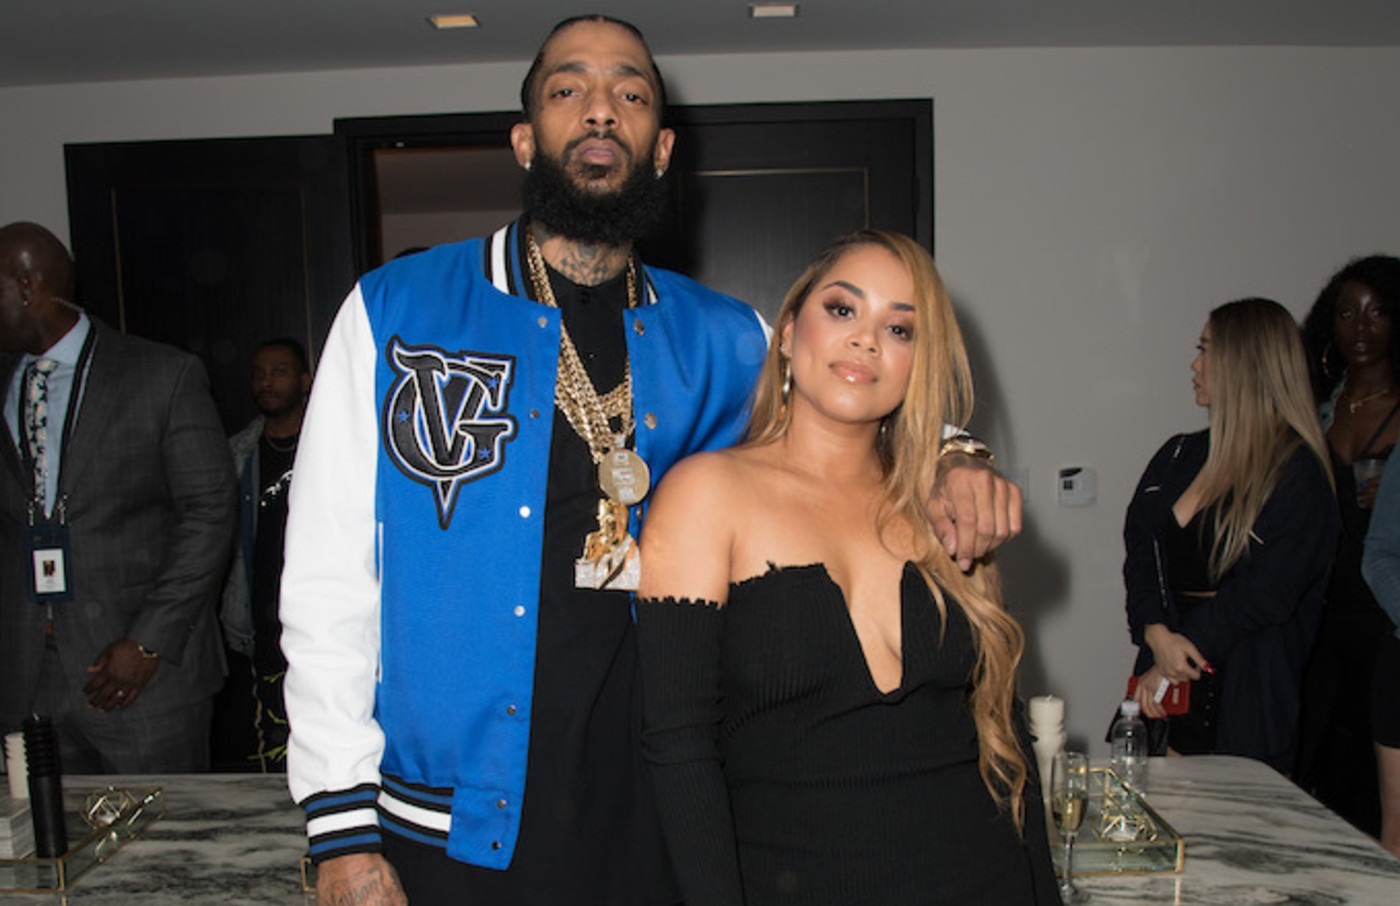 Nipsey Hussle quotes that will inspire you to succeed. We all need motivation and these Nipsey Hussle lyrics are perfect for that. nipsey hussle quotes, nipsey hussle quotes about love, nipsey hussle quotes from songs, nipsey hussle quotes victory lap, nipsey hussle best quotes, nipsey hussle songs, nipsey hussle racks in the middle, nipsey hussle brother, nipsey hussle braids, nipsey hussle death, nipsey hussle hoodie, best nipsey hussle songs, nipsey hussle lyrics you will love.